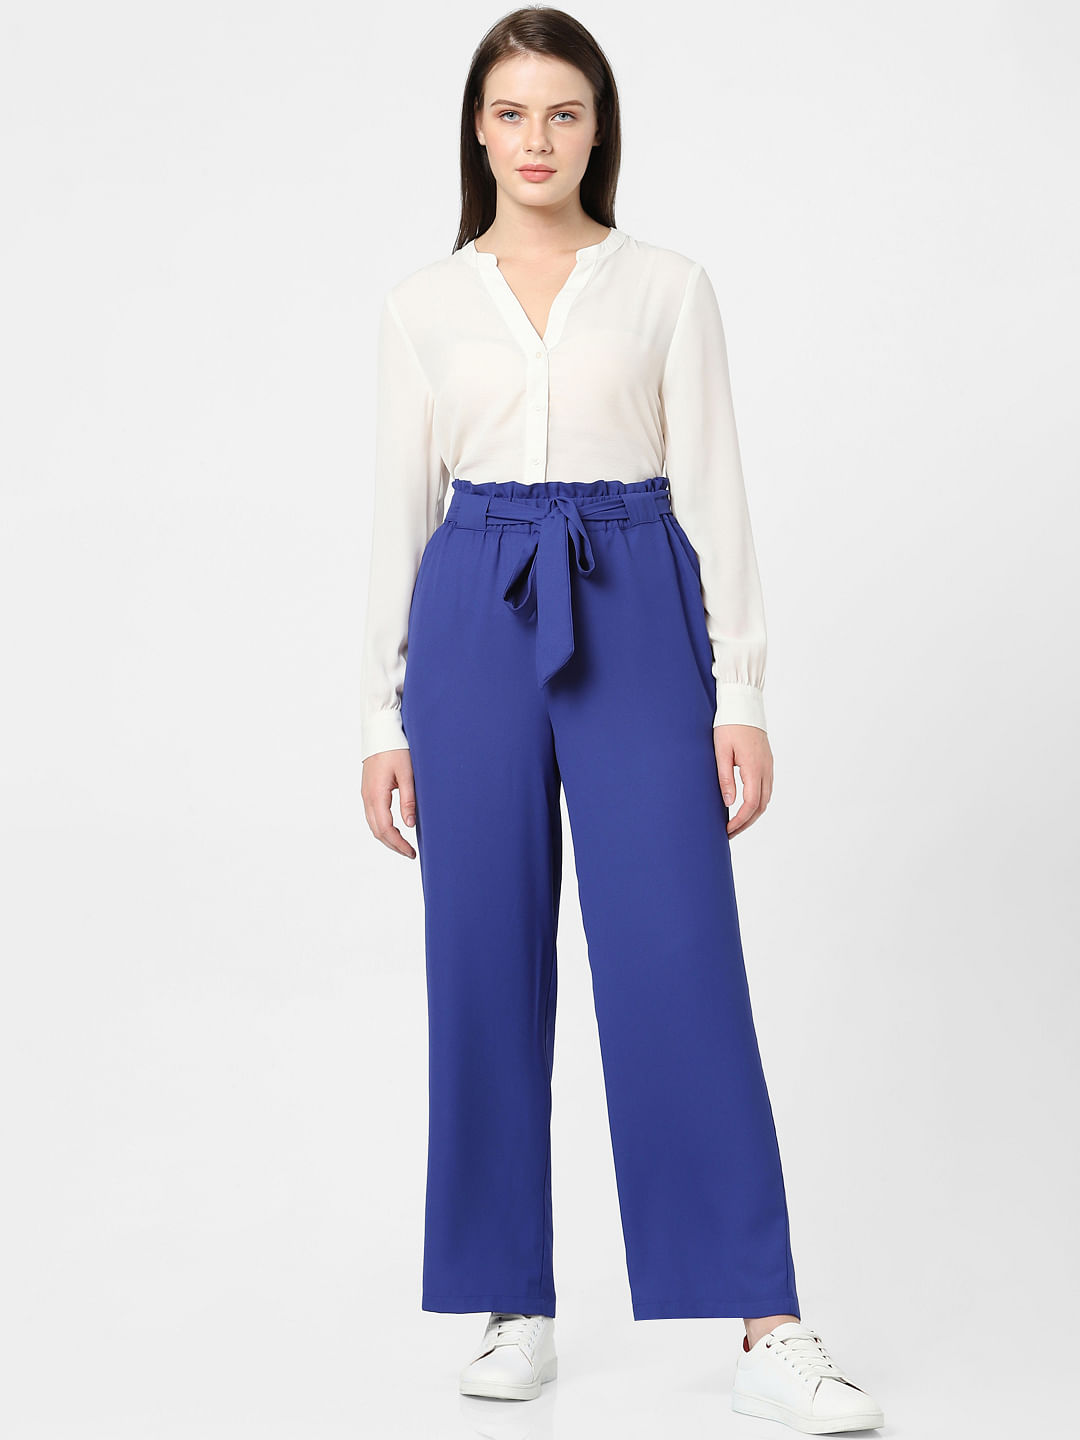 Buy Low Classic Trousers & Lowers online - Women - 30 products | FASHIOLA  INDIA